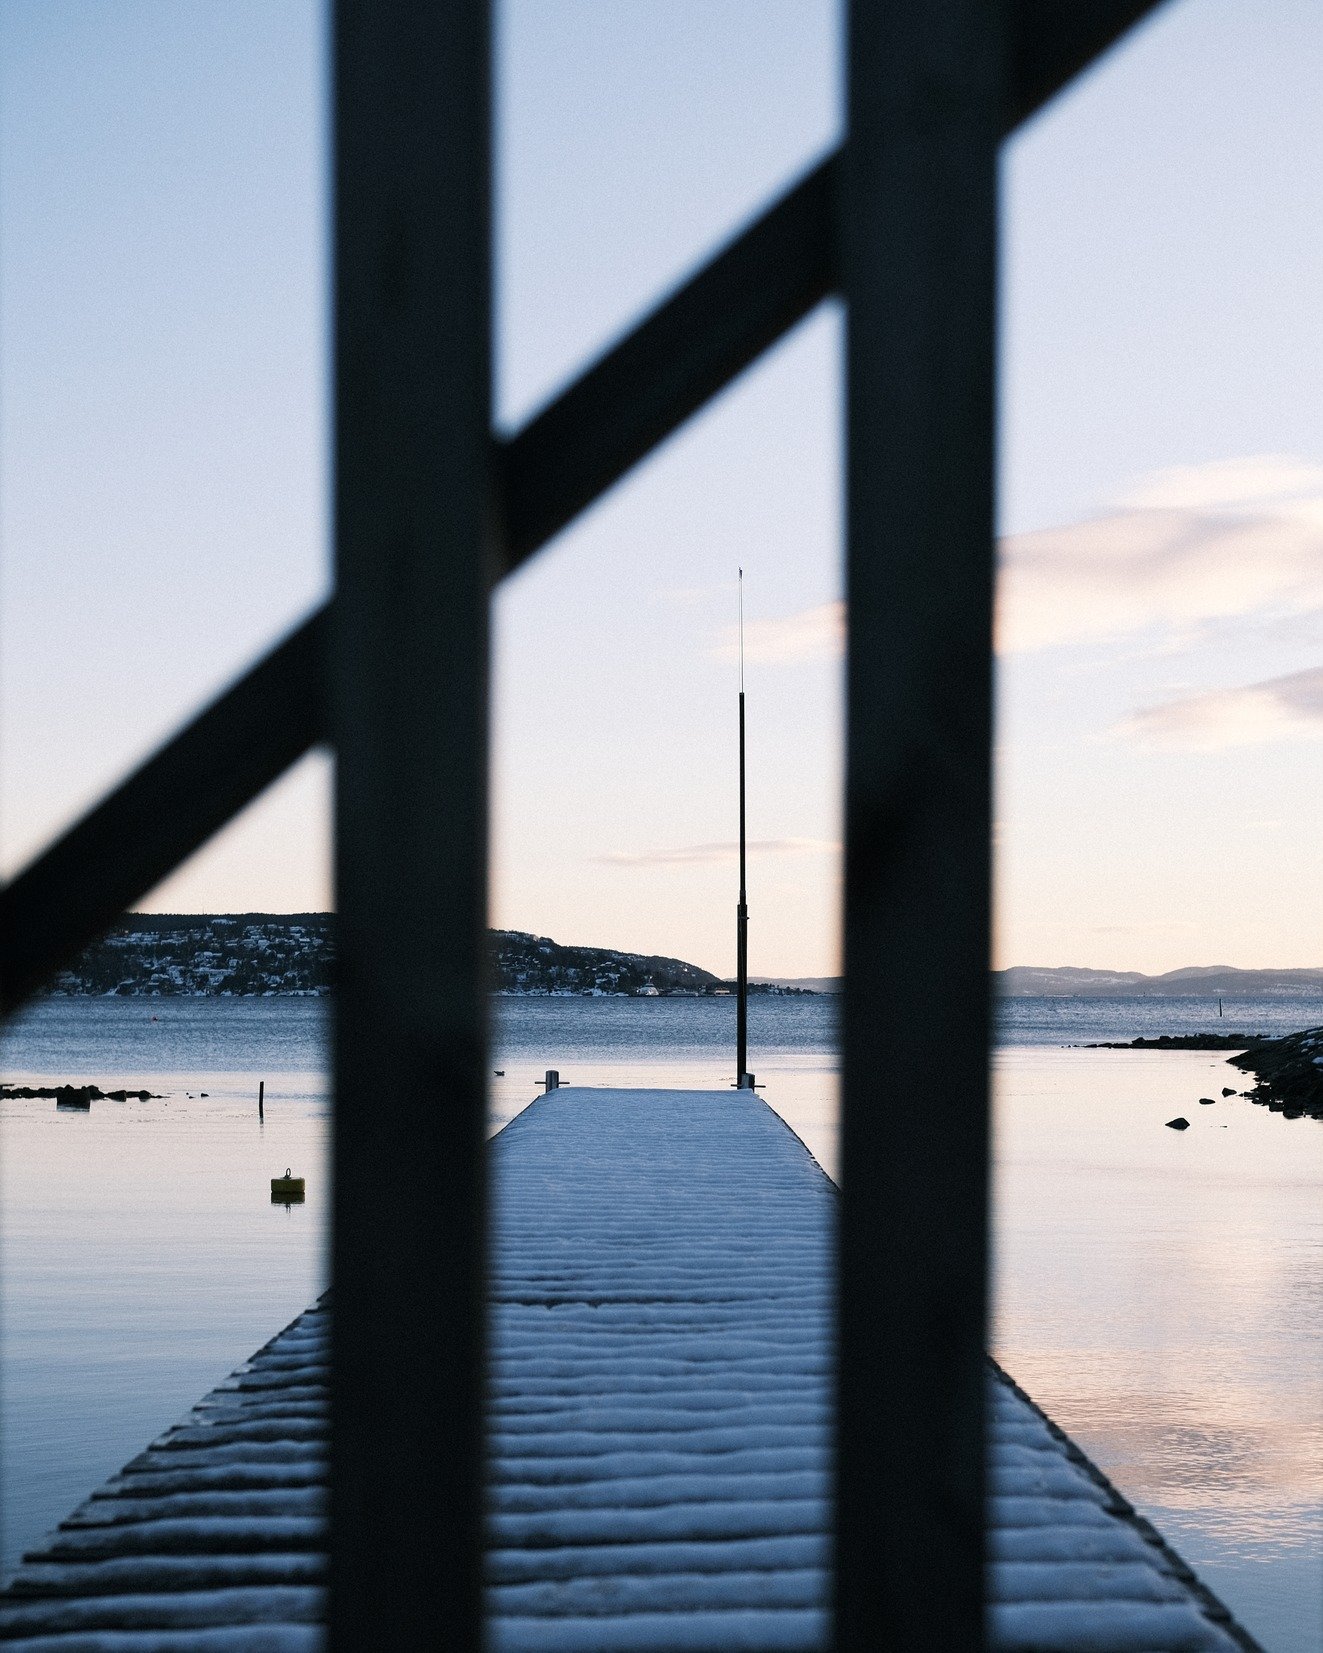 Frosty Pathway
A frost-covered pier leads to a solitary mast, a silent guidepost standing tall amidst the stillness of a winter's morning.
📷 Fujifilm X-T30 II
__
#WinterScenery #FrostyMorning #PierPhotography #CalmWaters #WinterHarbor #ChilledNature